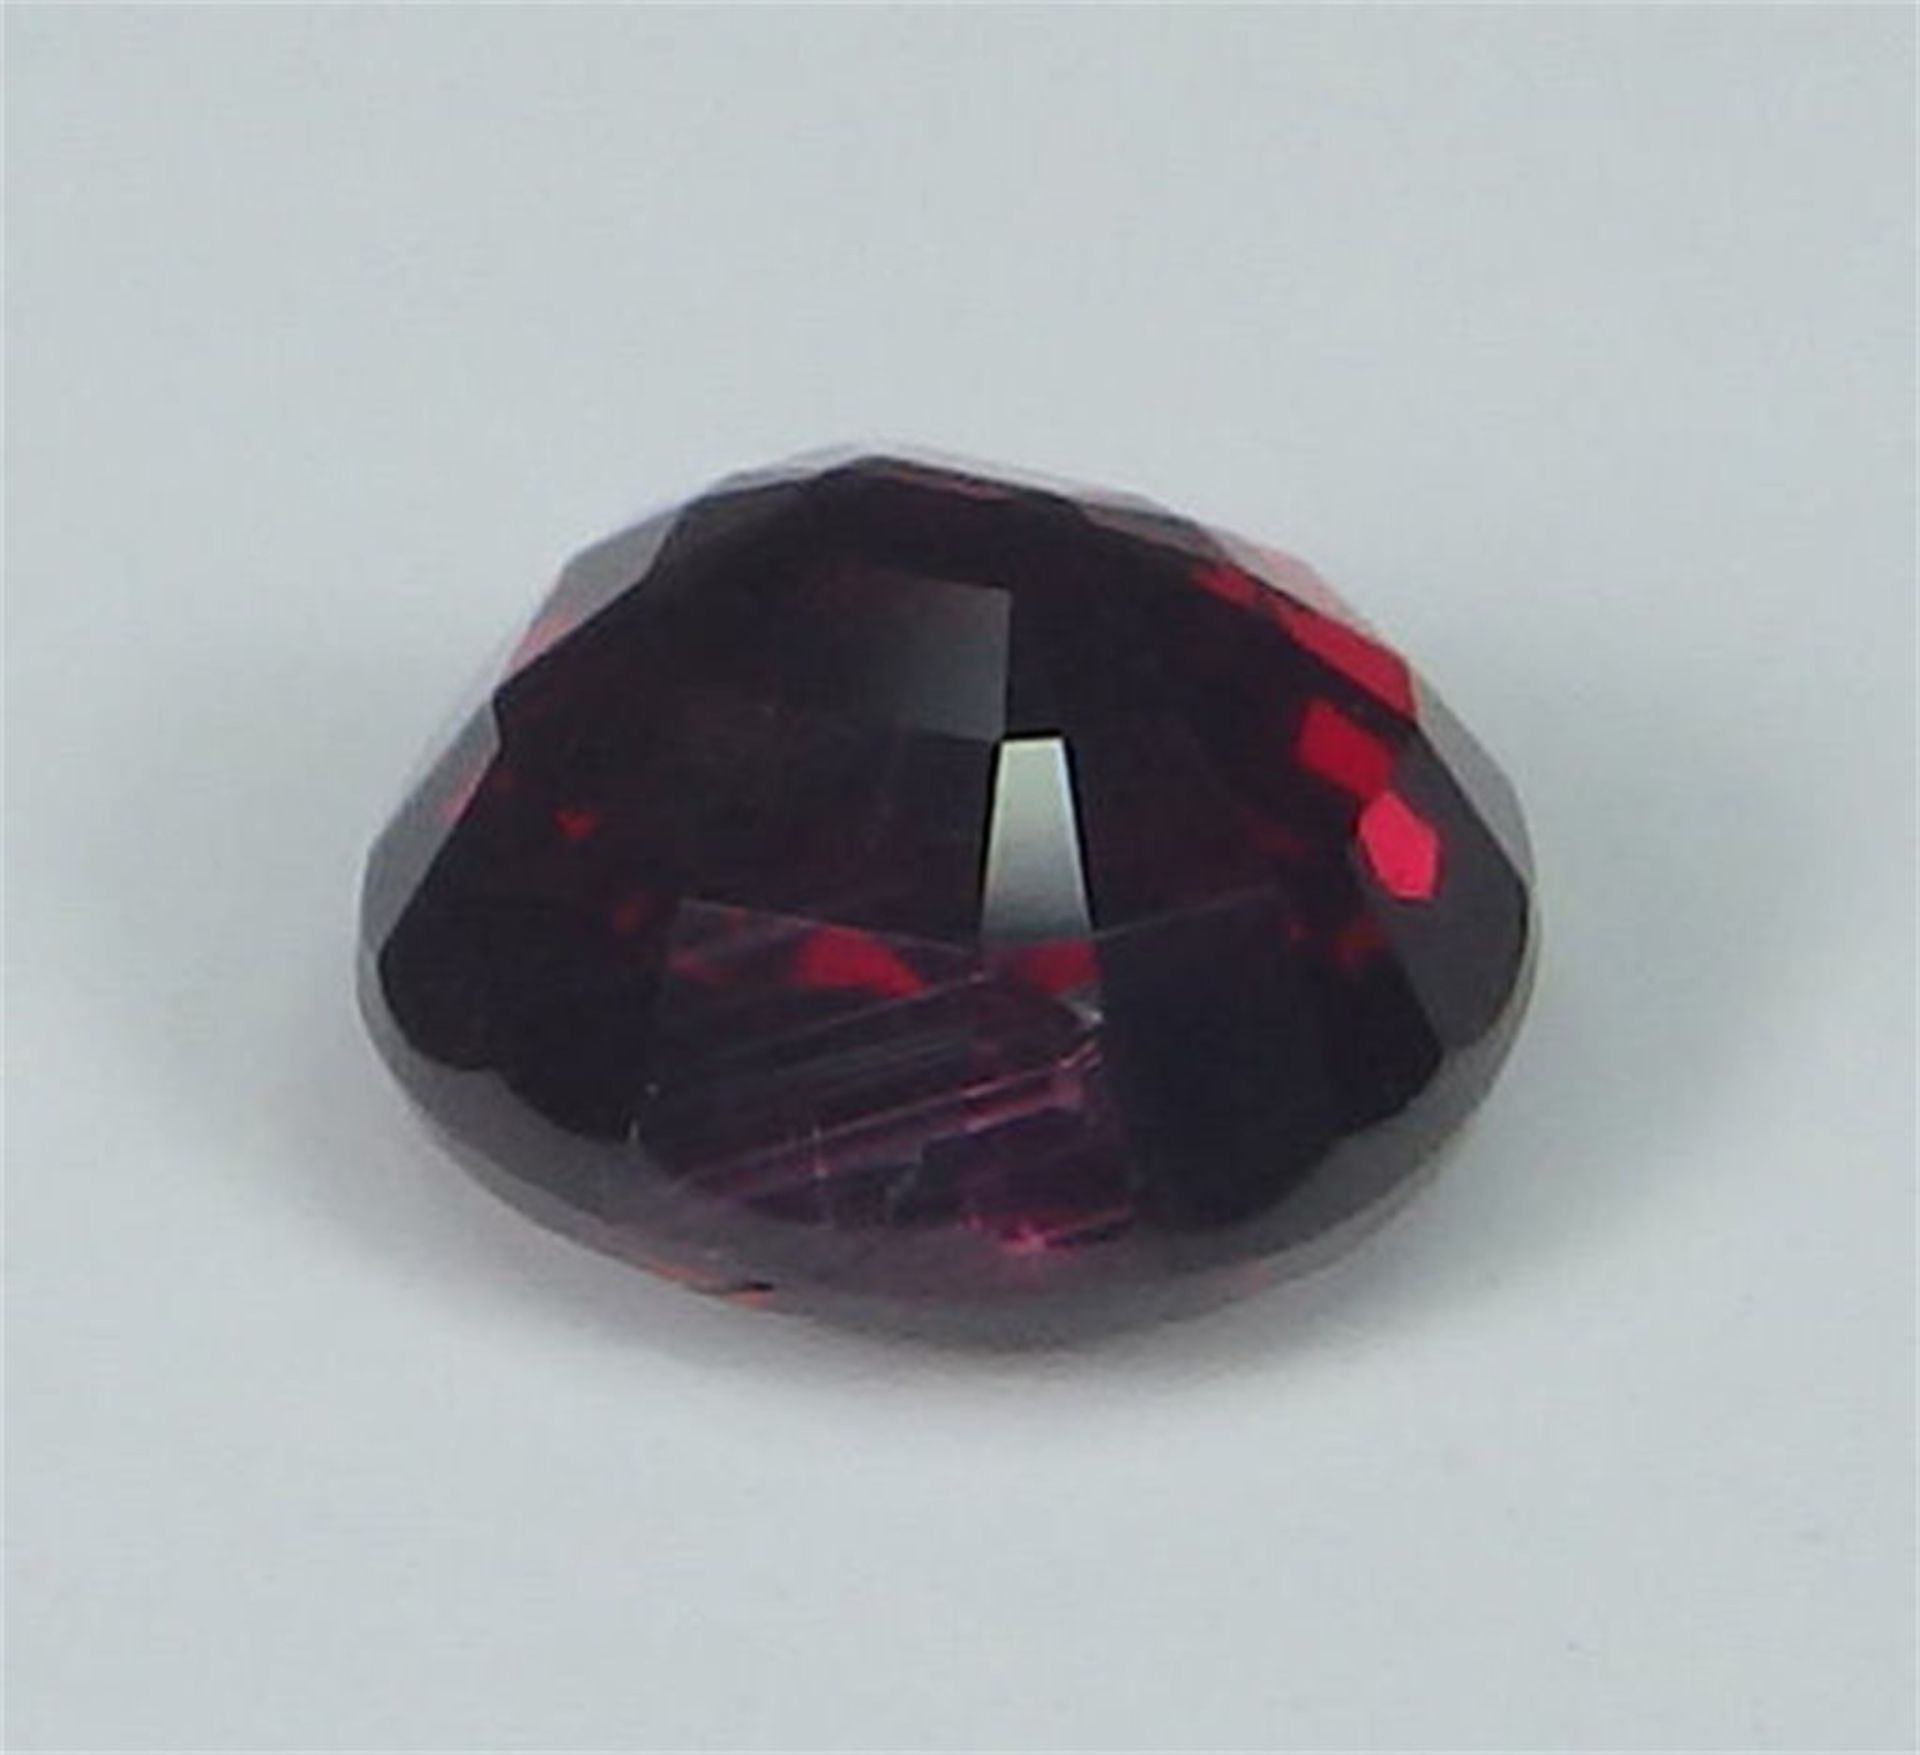 GIA Certified 1.09 ct. Untreated Pigeon’s Blood Ruby - BURMA - Image 10 of 10